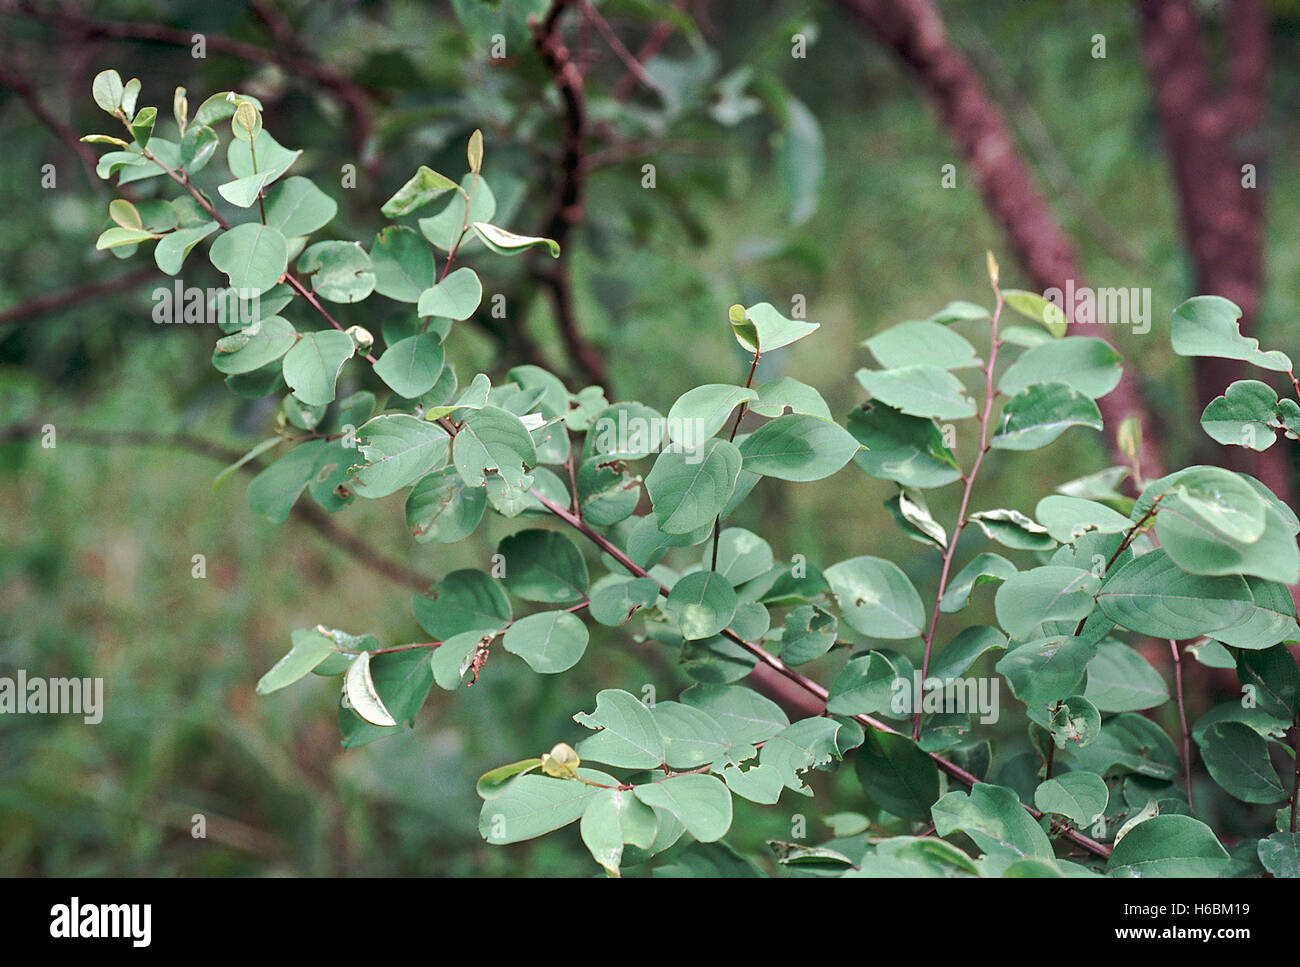 Leaves. Securinega sp. Family: Euphorbiaceae. A large shrub found in deciduous forests. The leaves are used as fodder for goats. Stock Photo